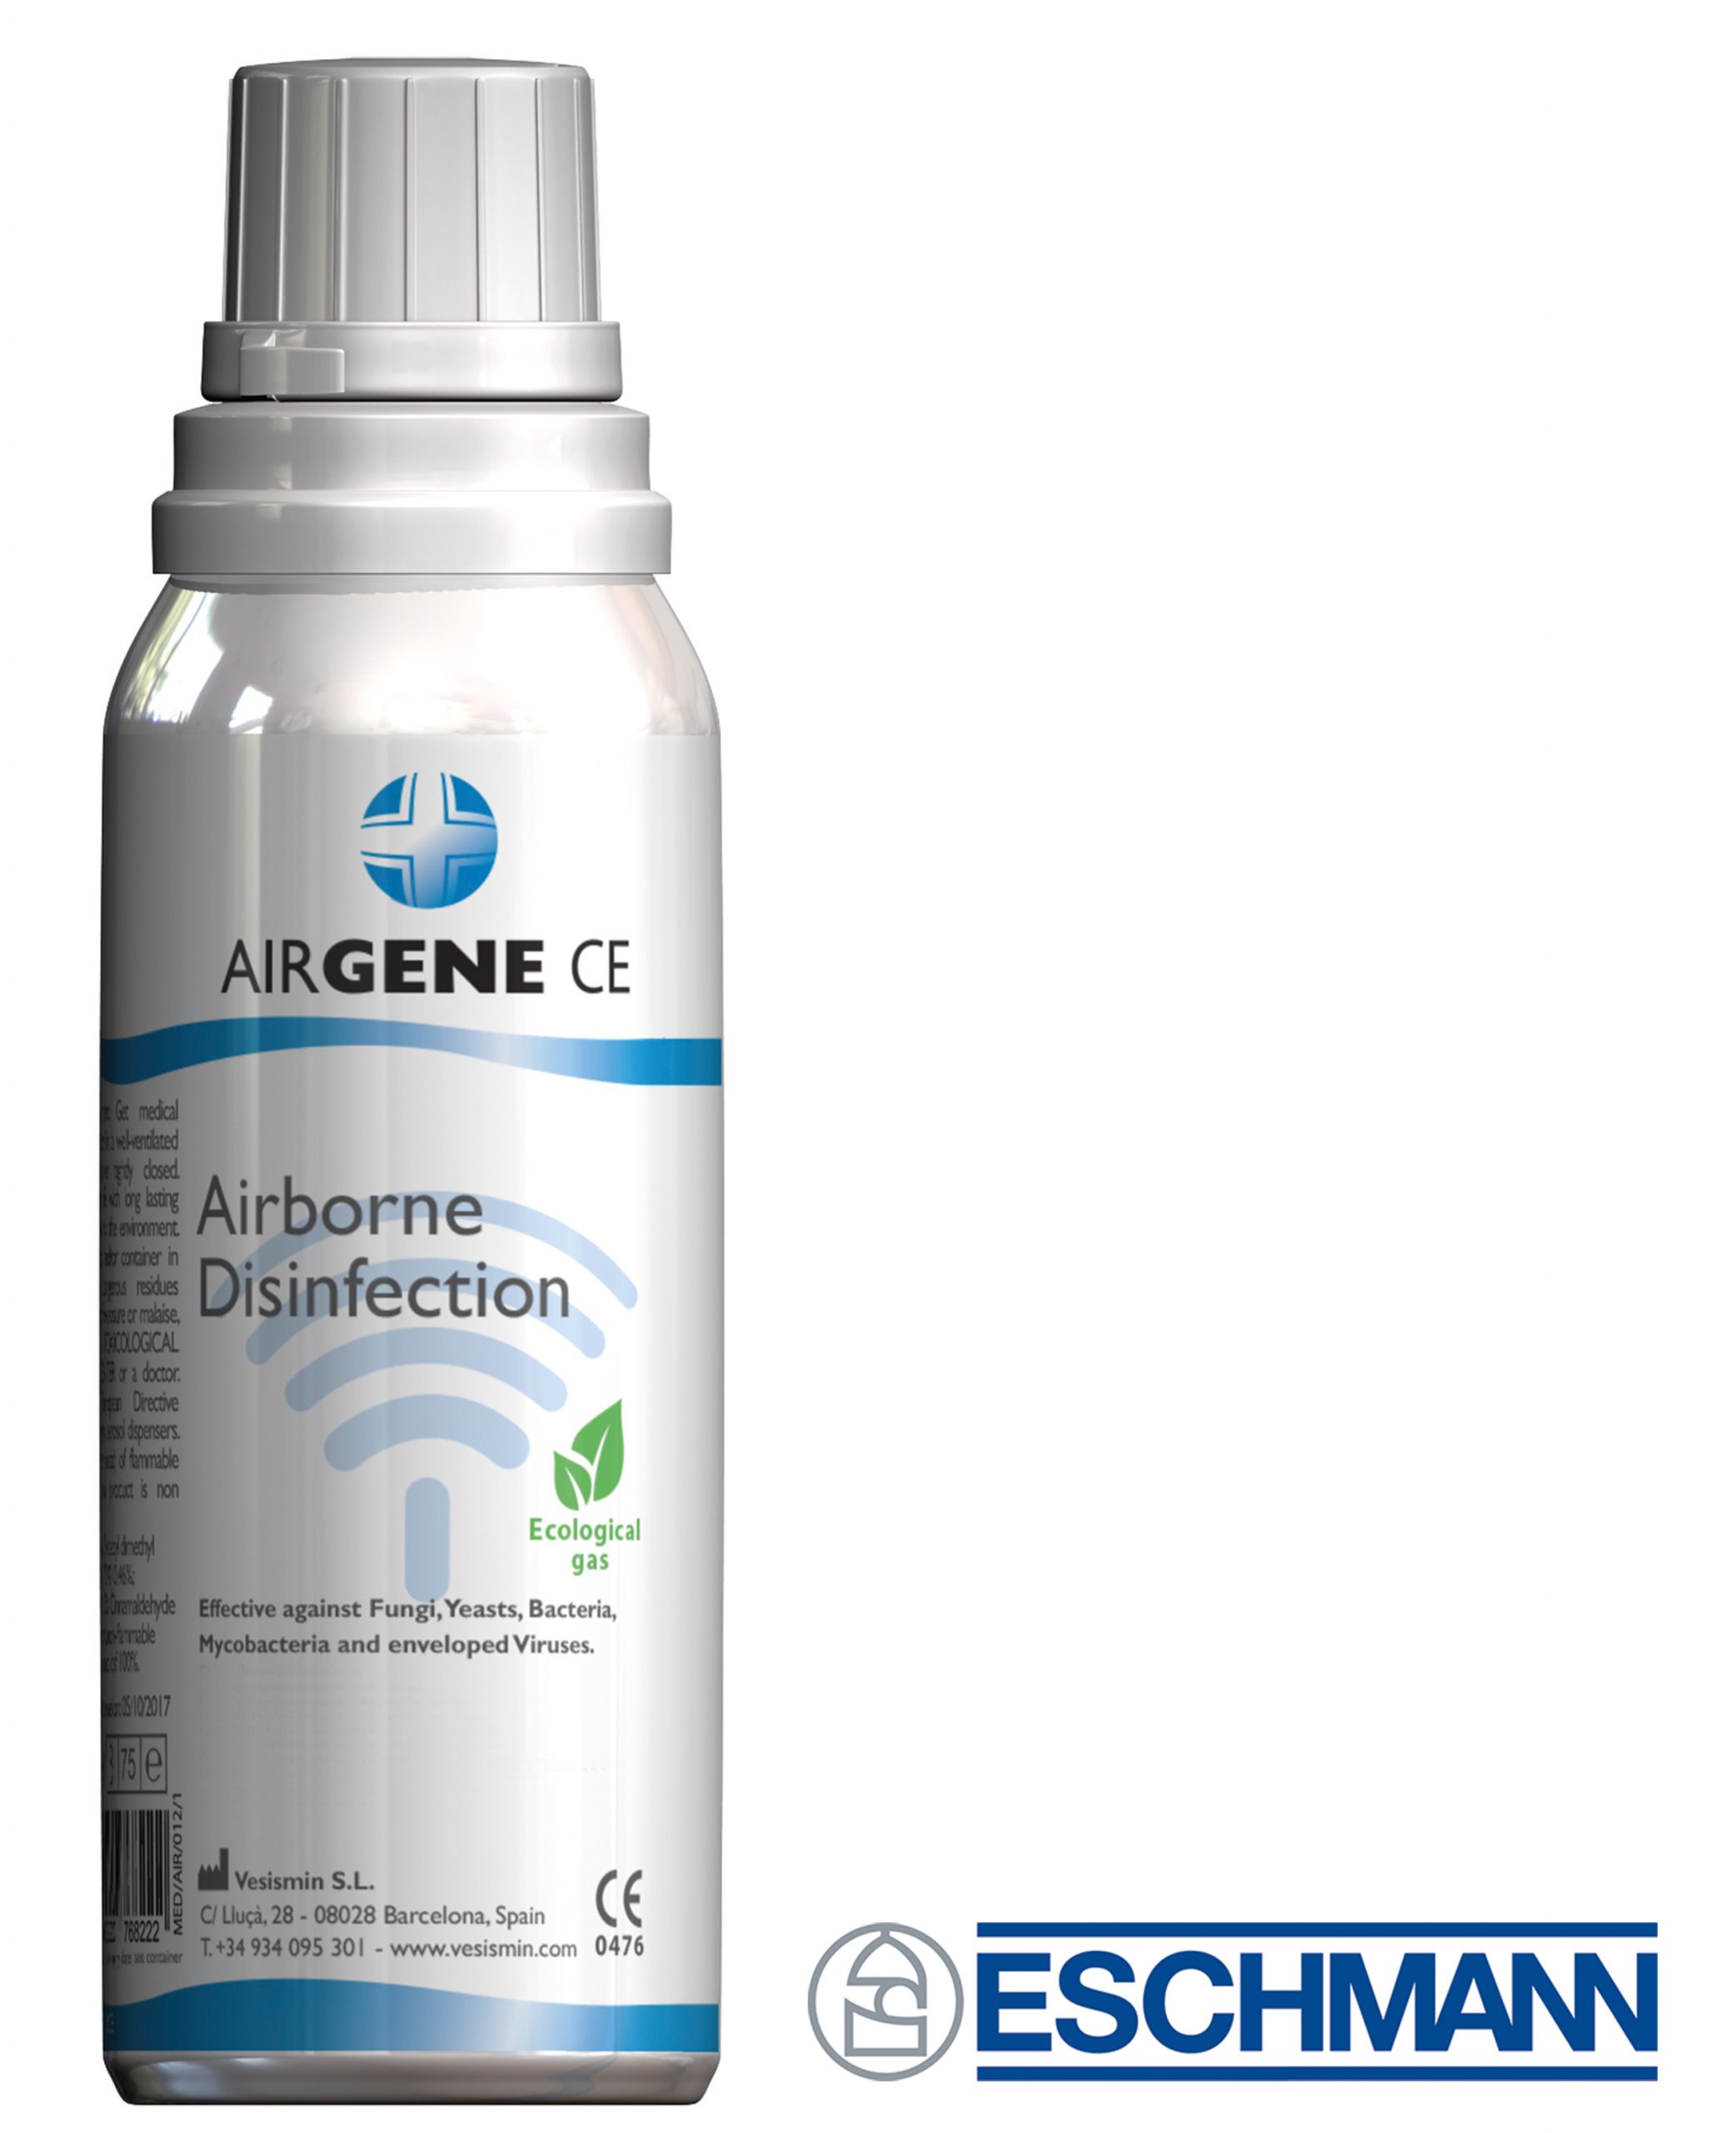 Eschmann Airgene provides total protection for your practice